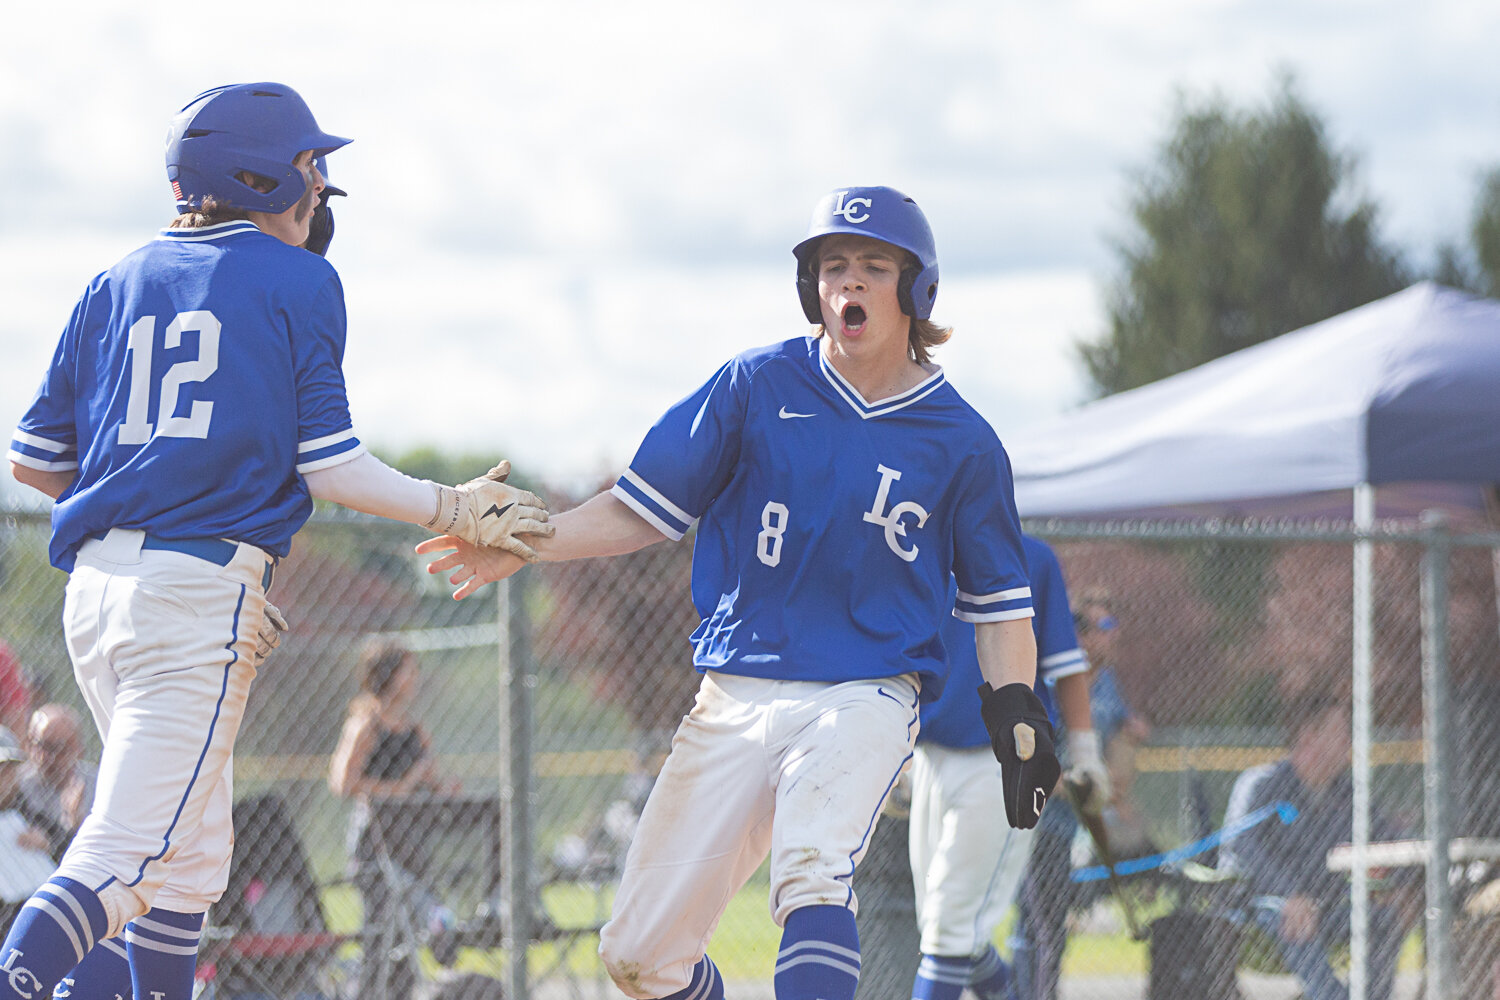 La Center outfielder Justin Fuller celebrates a three runs scored against Tenino in the 1A District 4 semifinals May 9 at Castle Rock.